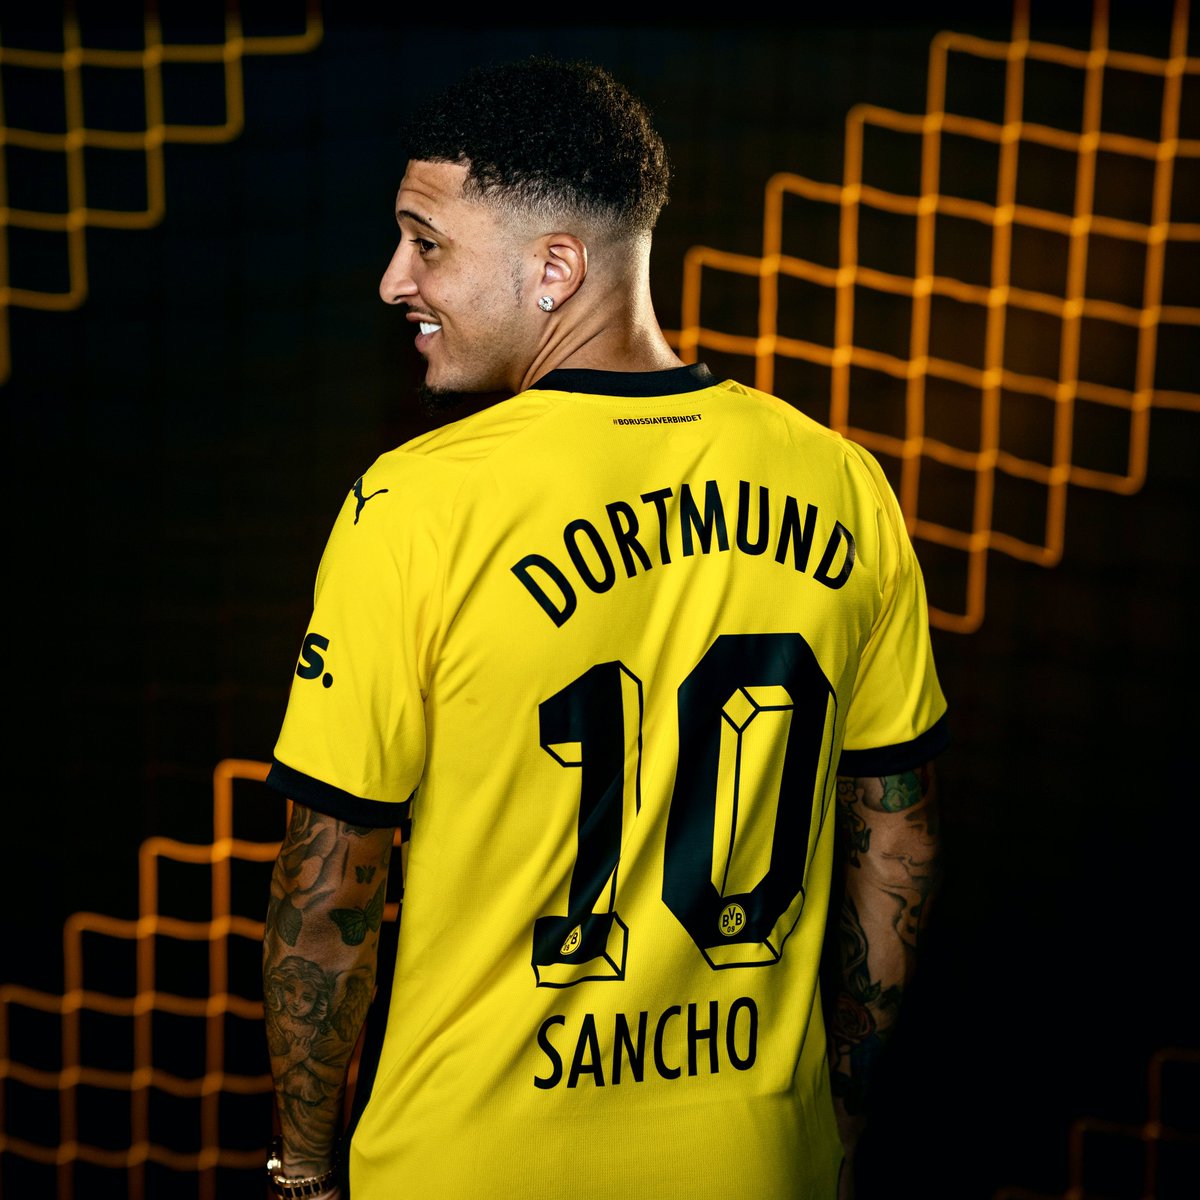 🚨 | Borussia Dortmund are exploring the possibility of a second loan deal for Jadon Sancho with #mufc that would contain an obligation to buy. [@berger_pj]